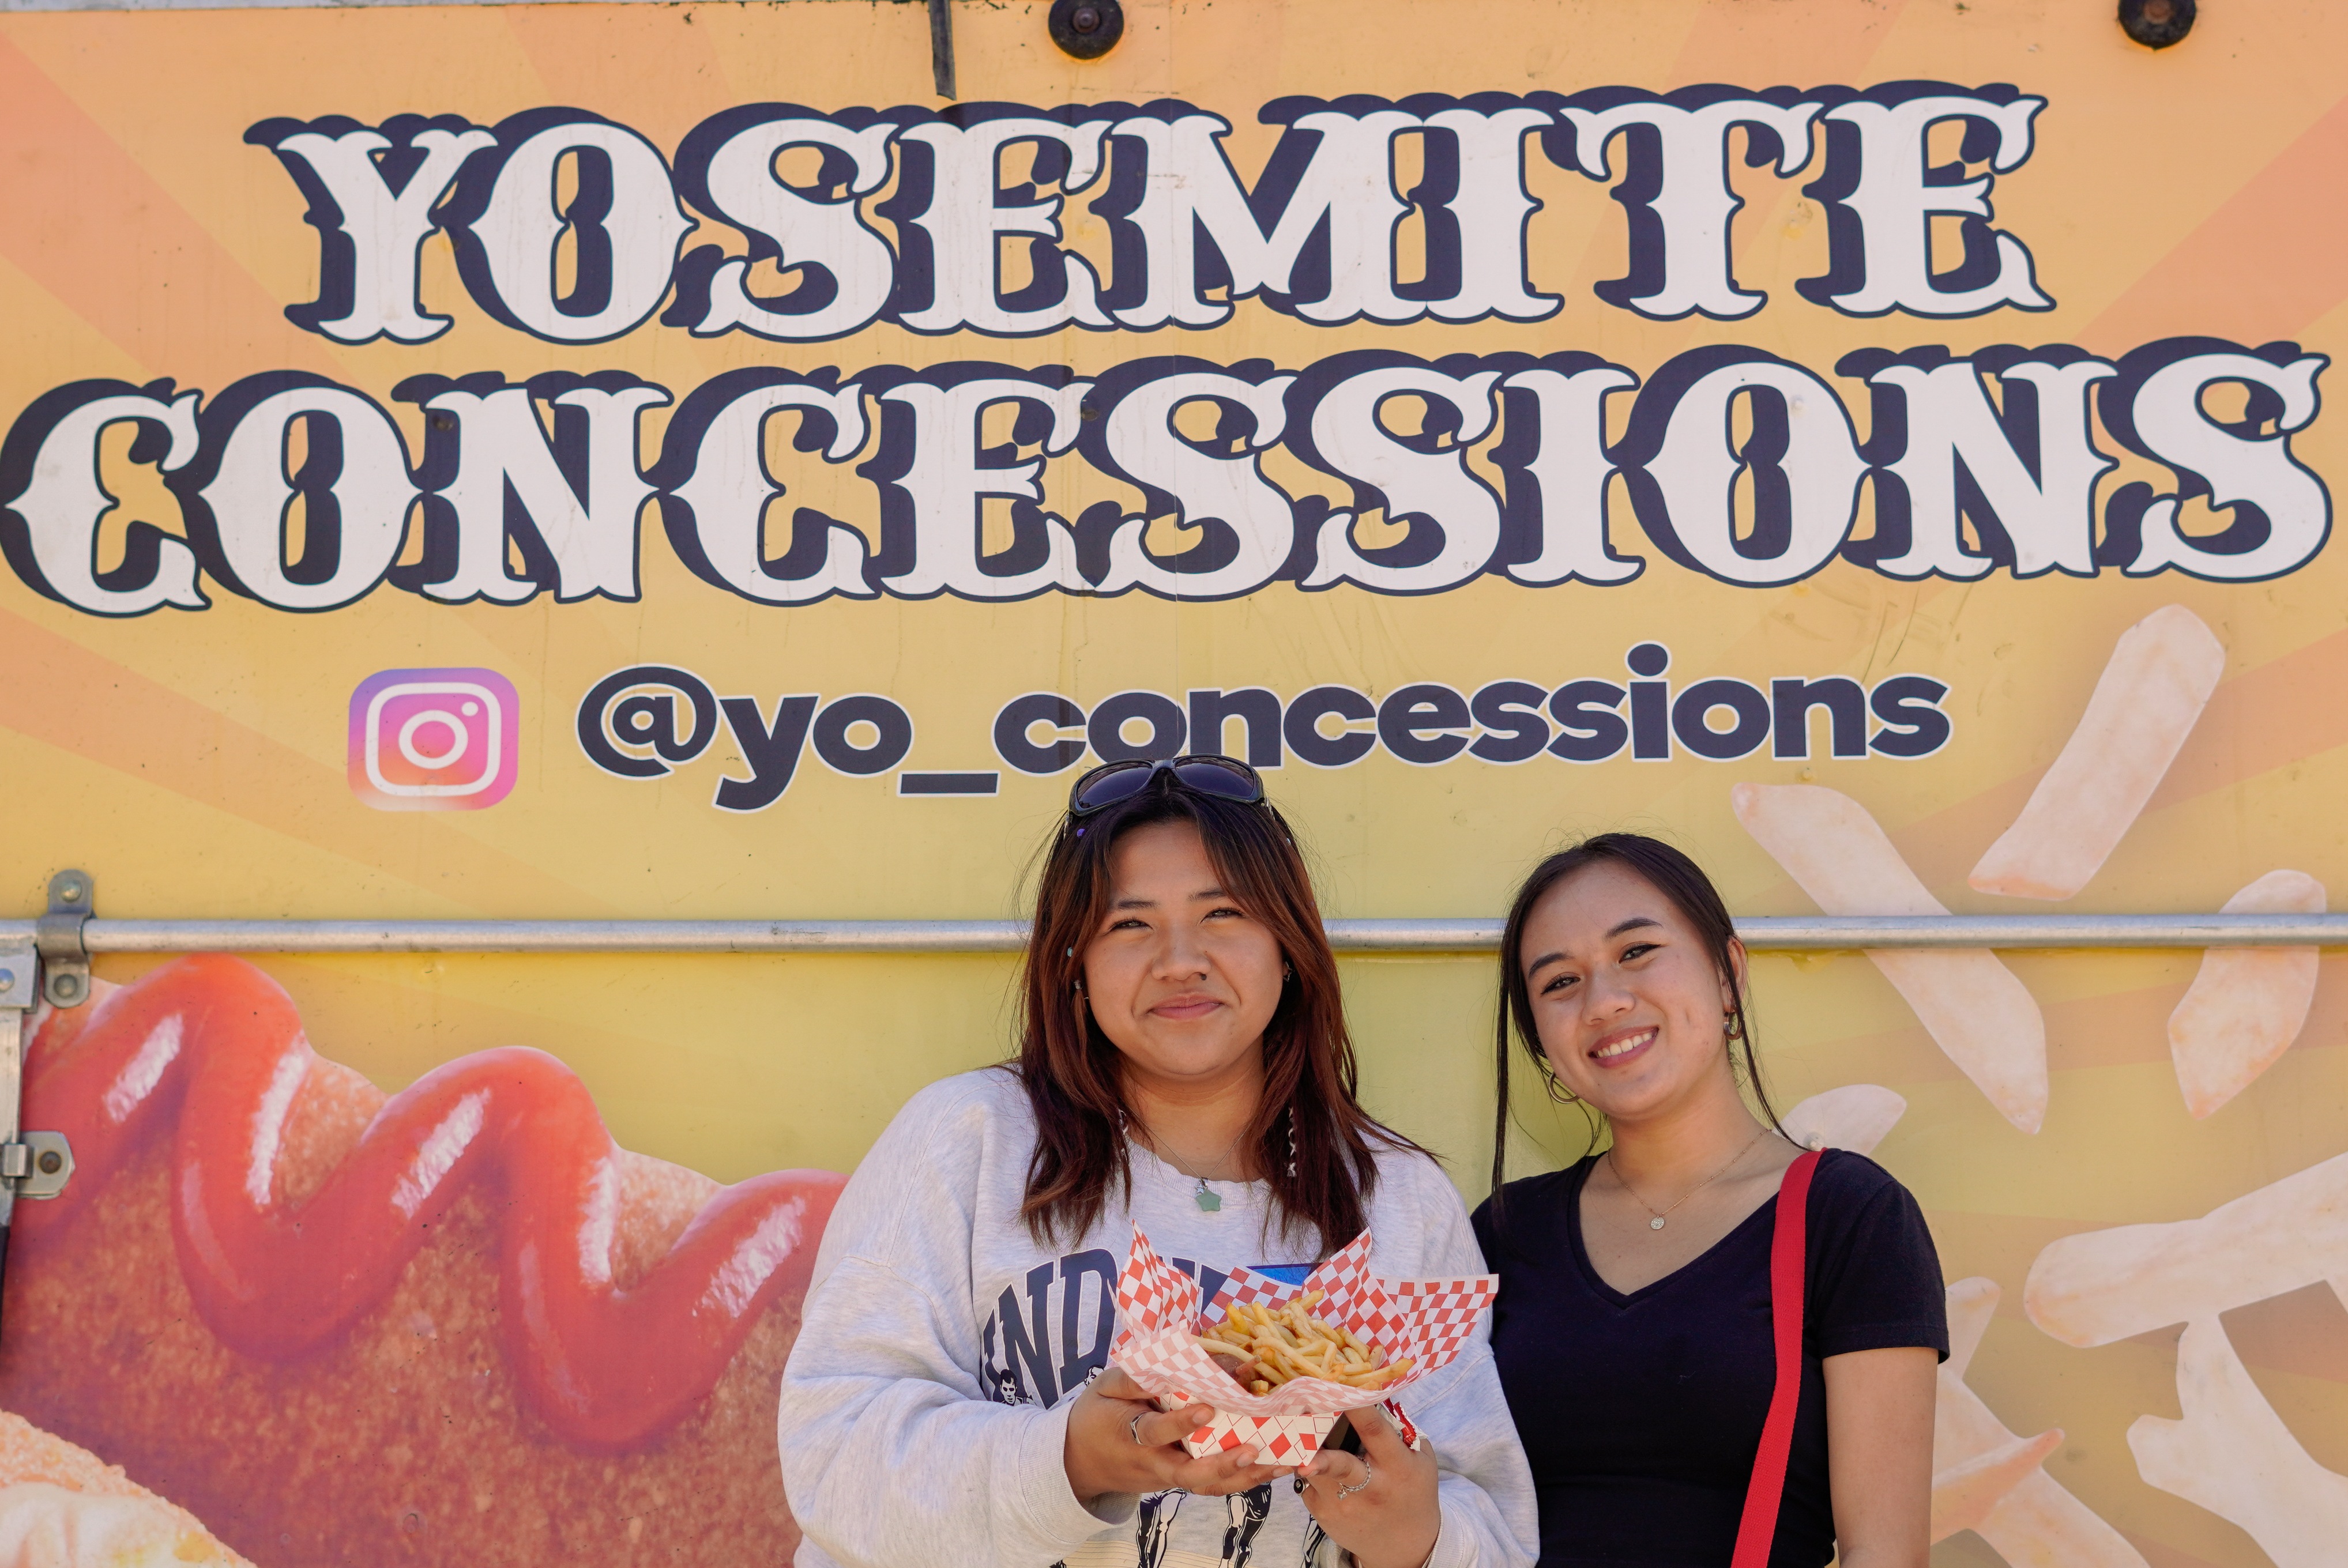 Two students pose in front of the Yosemite Concessions name and Instagram with their food